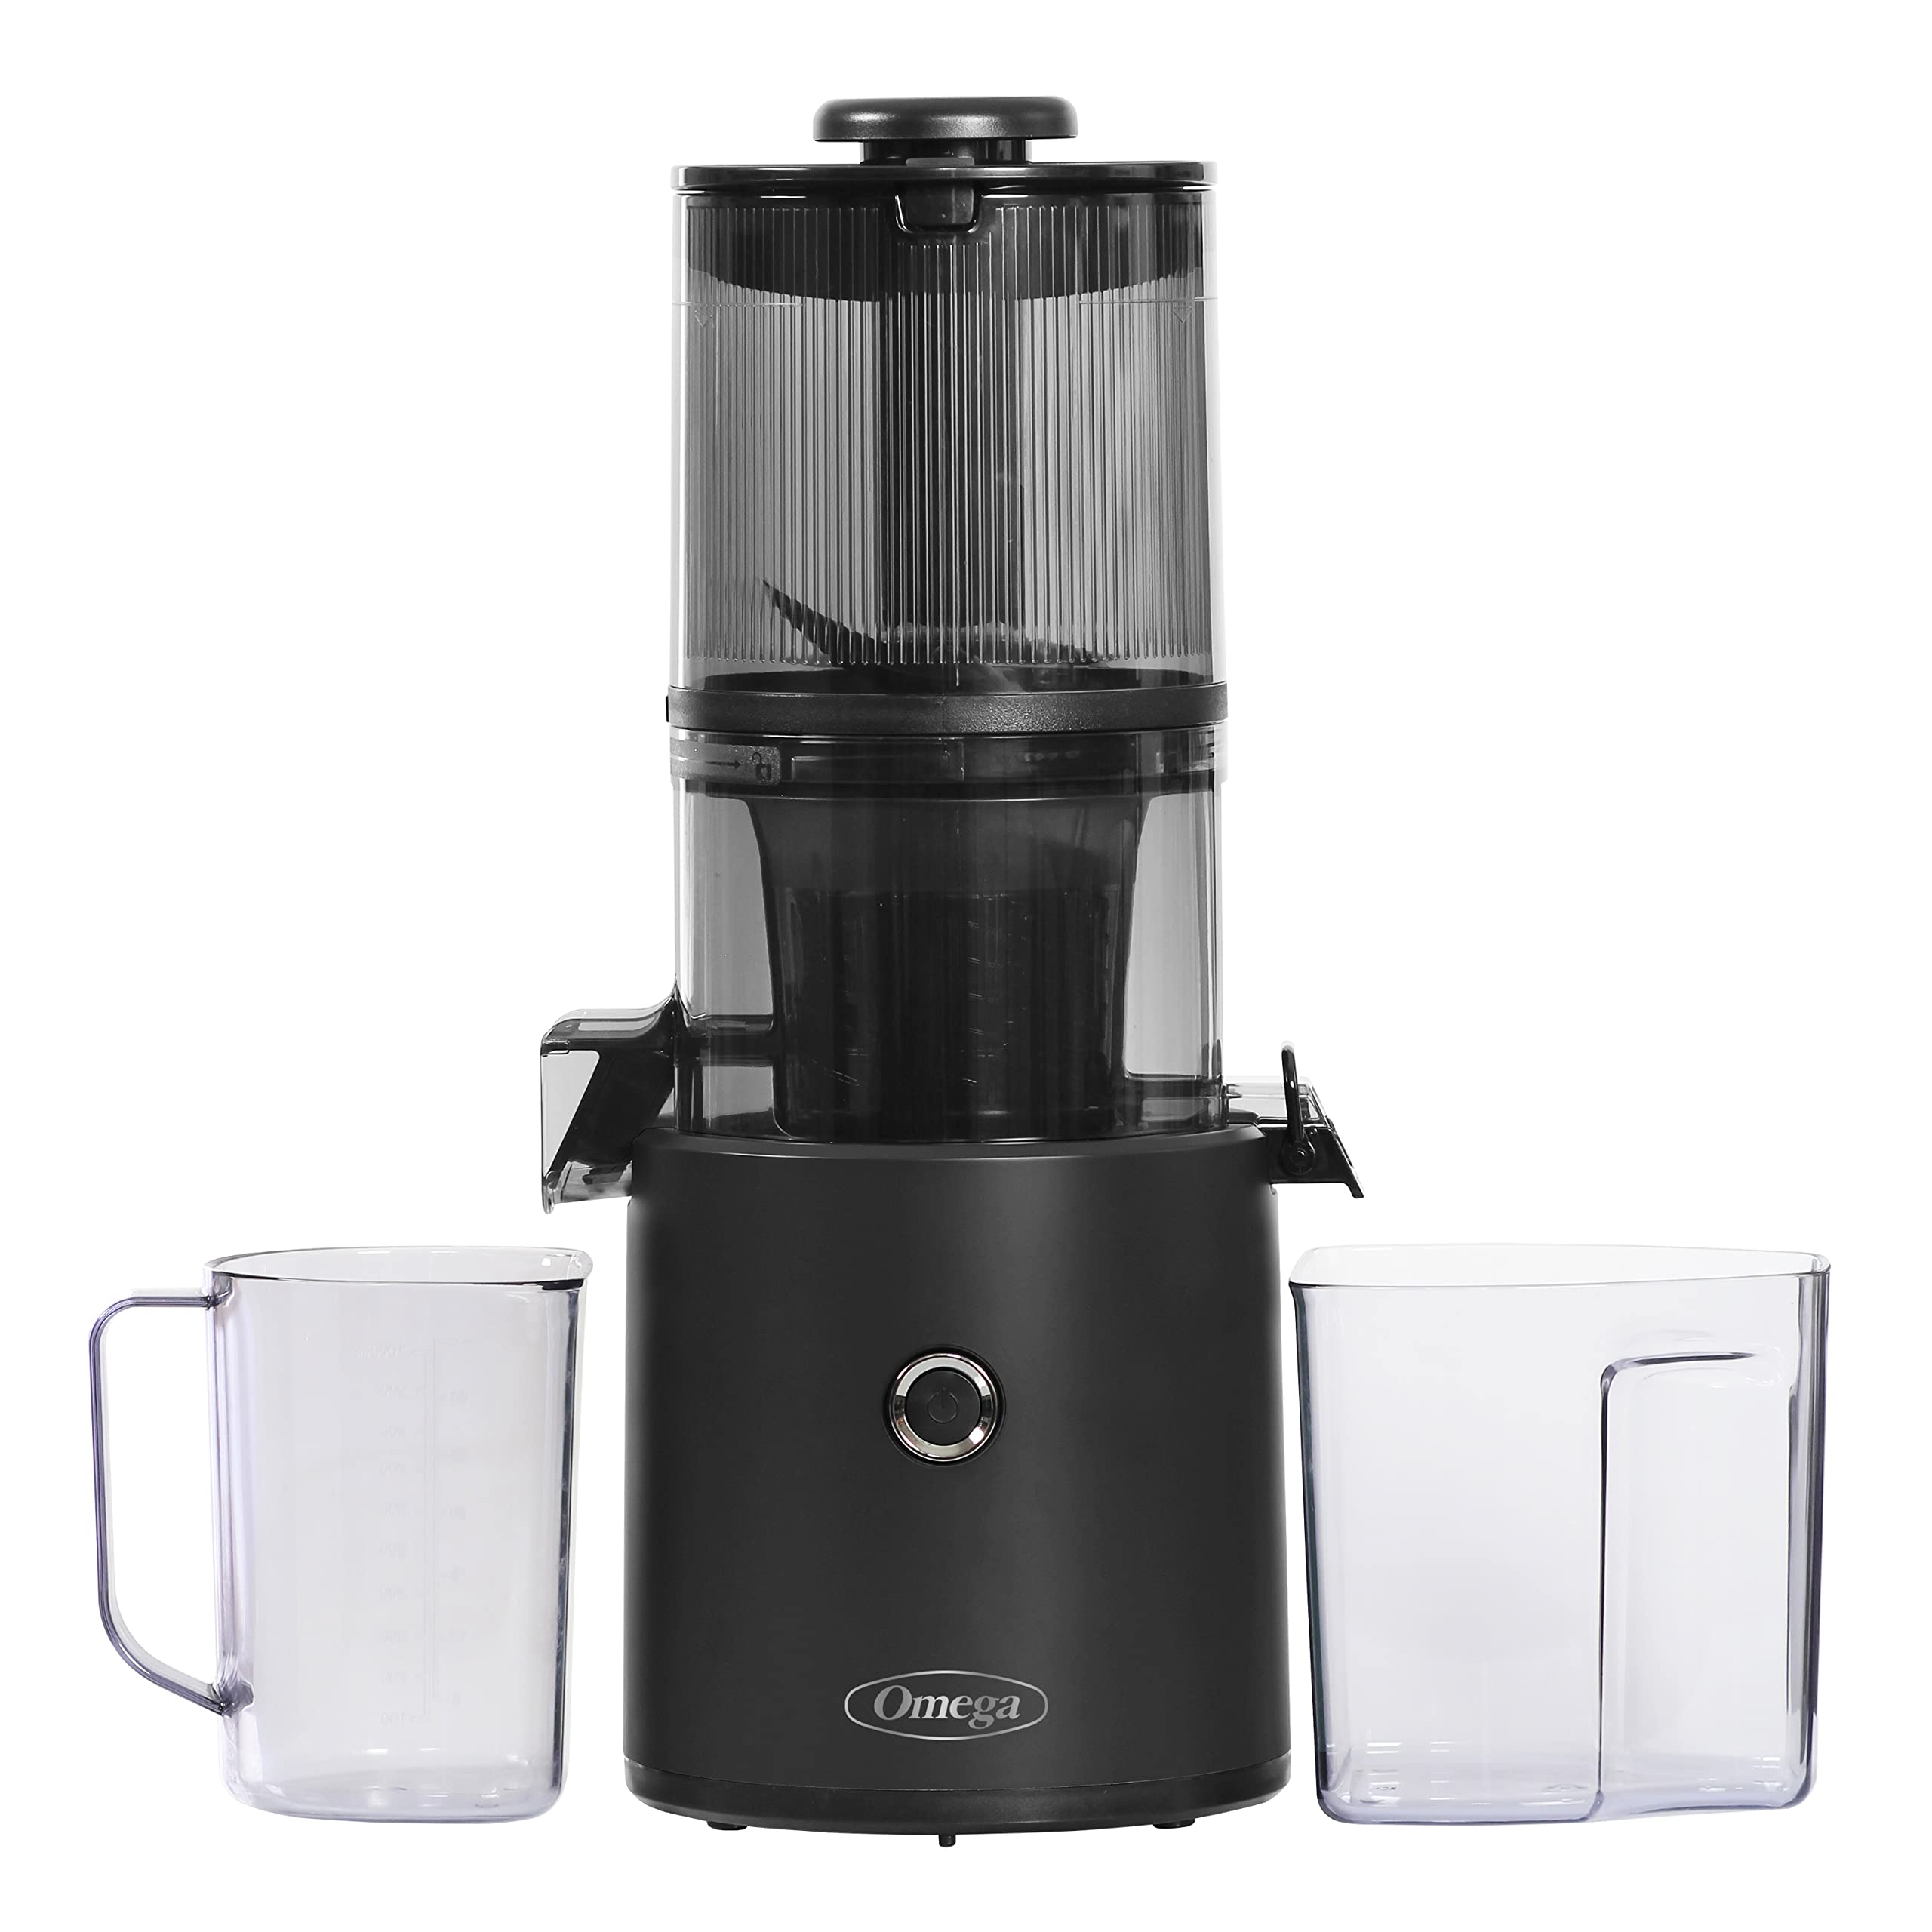 Omega Juicer JC2022BK11 Slow Masticating Cold Press Vegetable and Fruit Juice Extractor Effortless Series for Batch Juicing with Extra Large Hopper for No-Prep, 68-Ounce Capacity, 150-Watts, Black